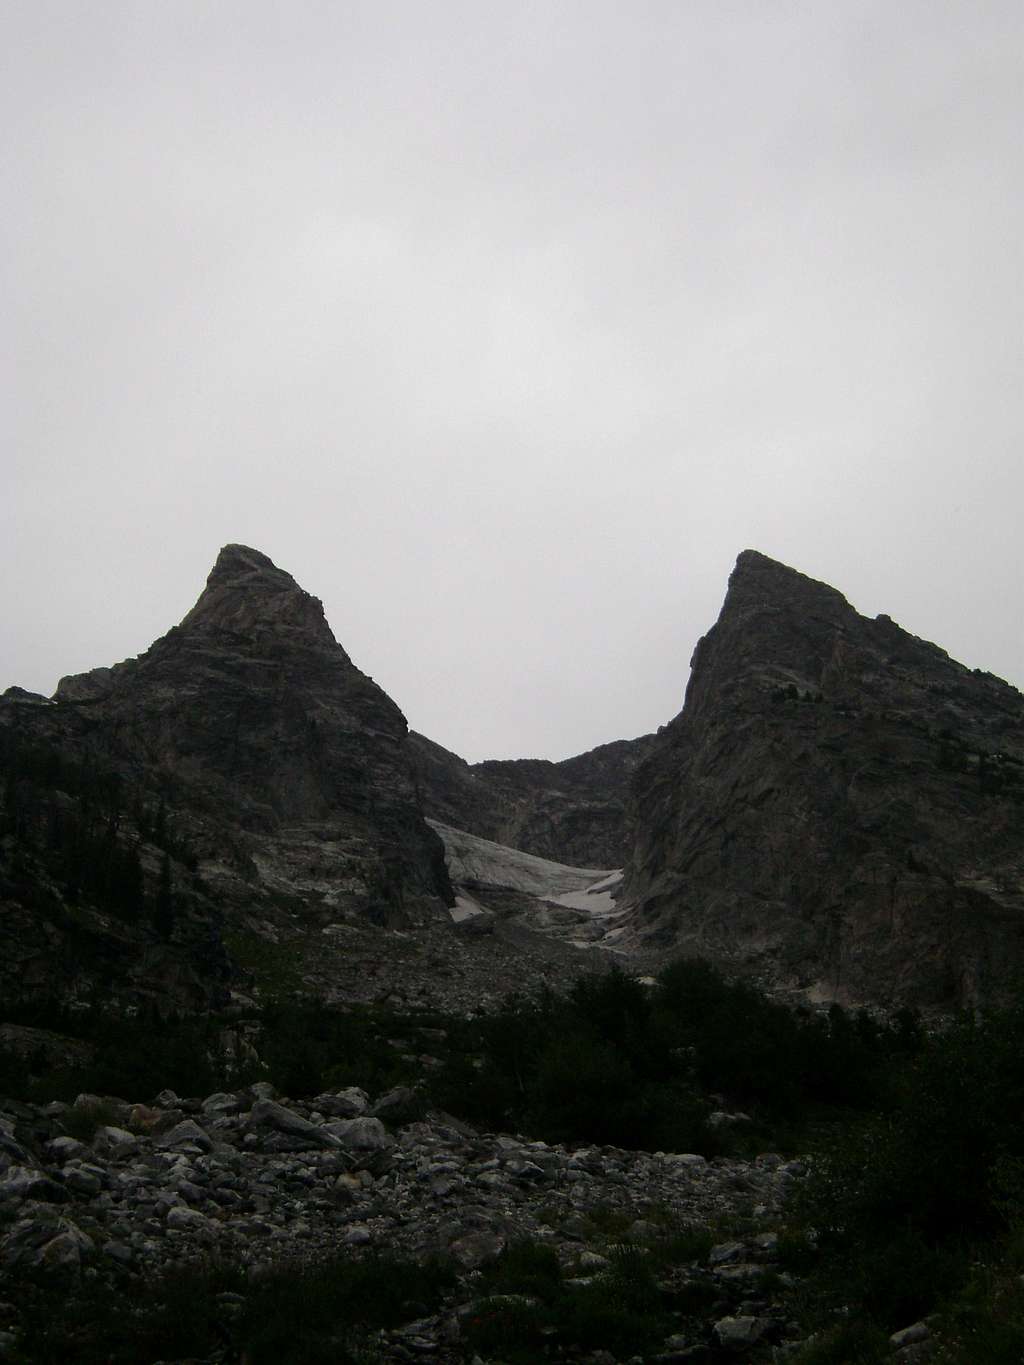 The East and West Horns of Mount Moran, Teton Range